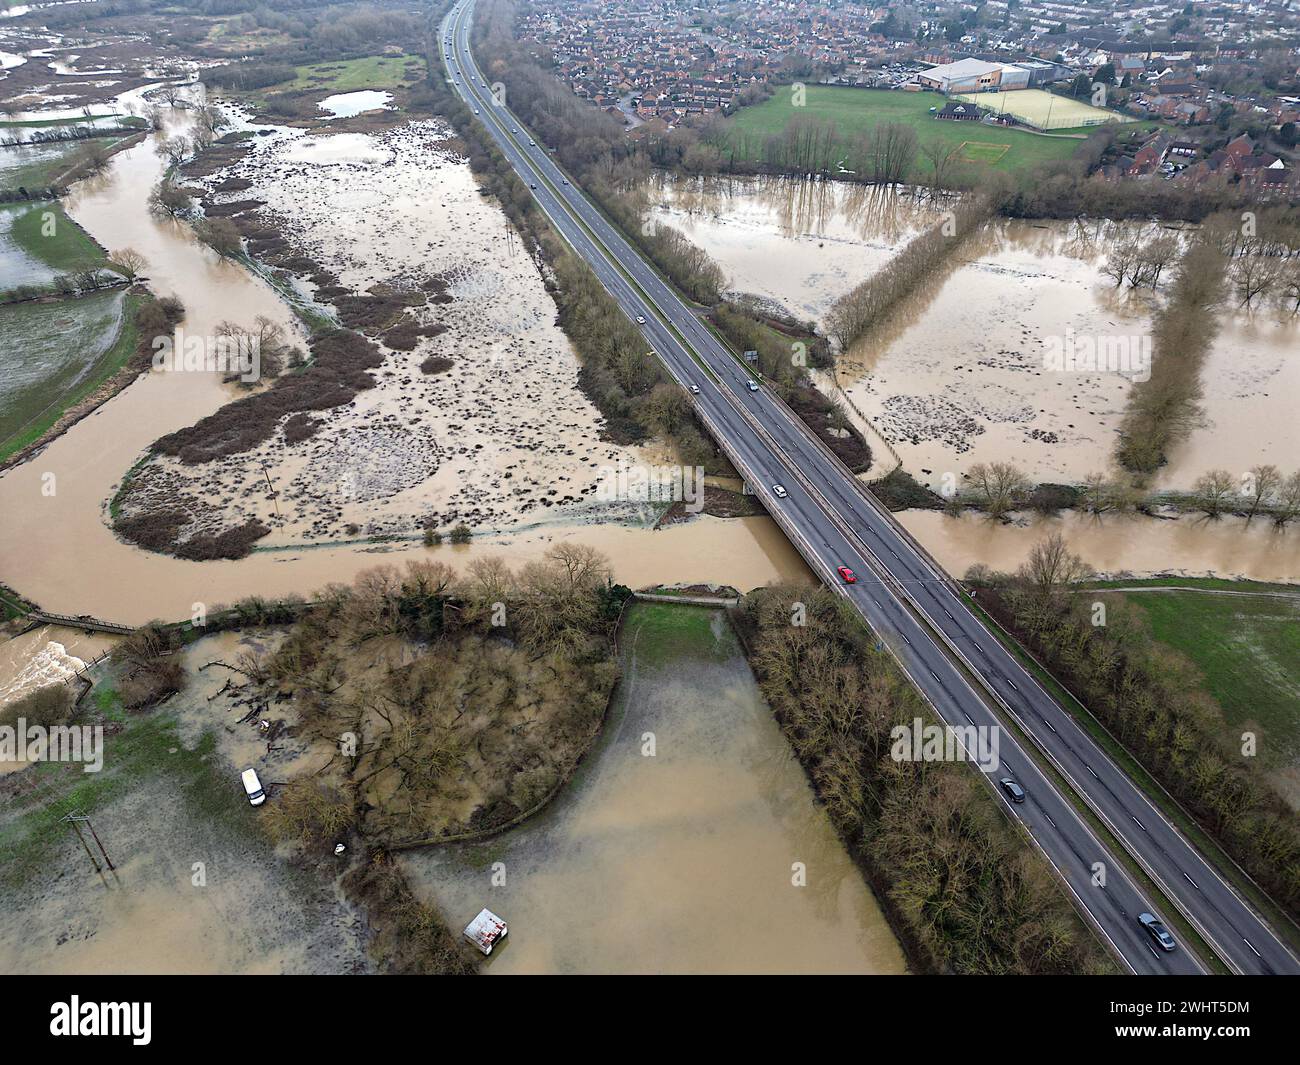 Mountsorrel, Leicestershire, UK, 11th February 2024.  Leicestershire still struggles to recover from the rains with widespread flooding from the River Soar. Credit: Chris De Bretton-Gordon / Alamy Live News. Stock Photo